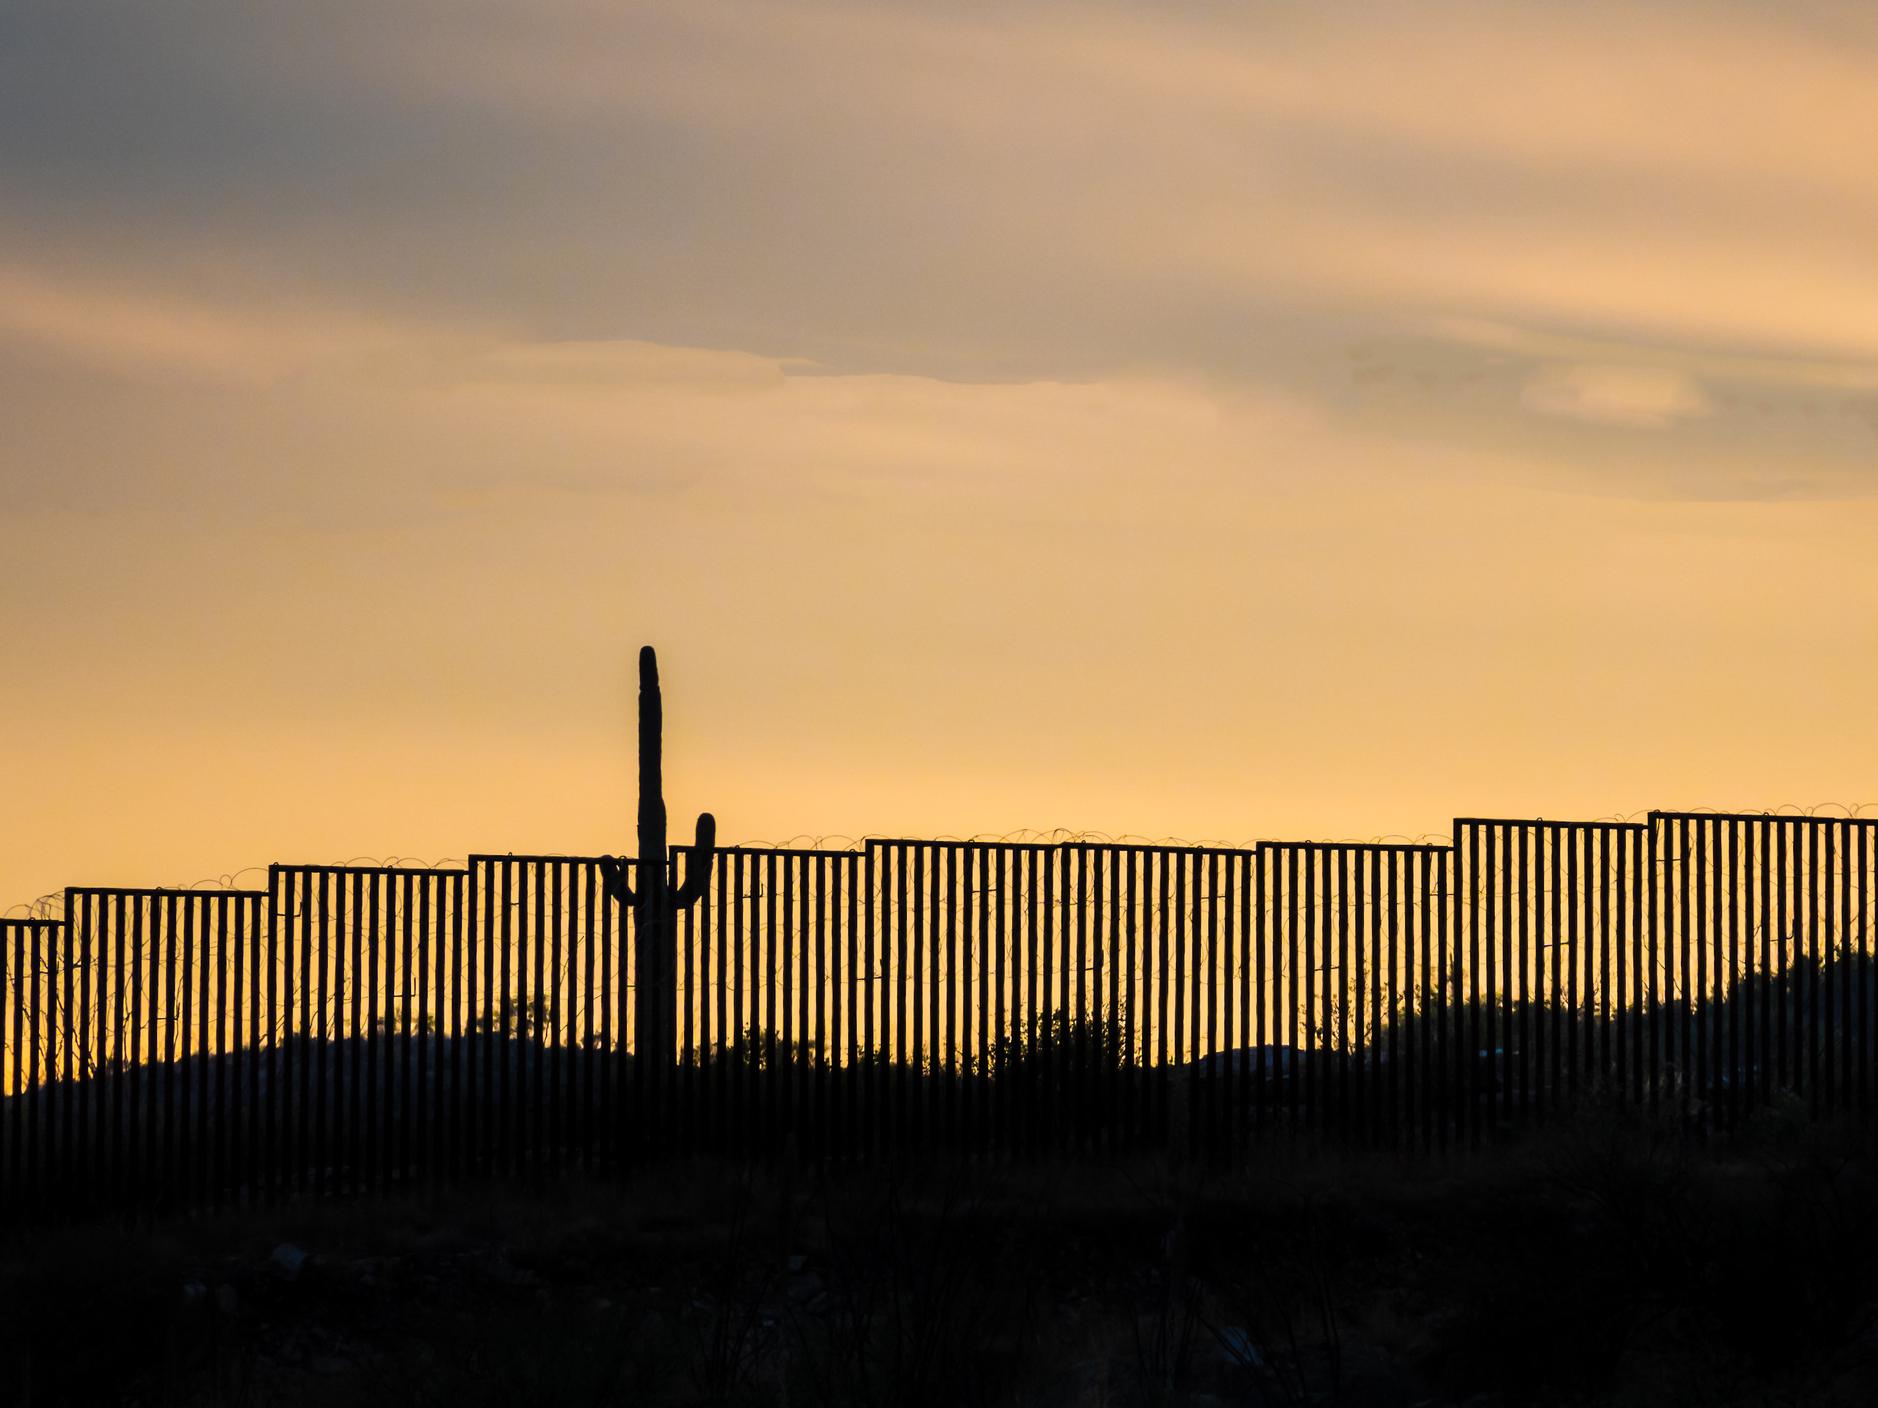 A silhouette of the US-Mexico border wall at sunset, along with a large cactus